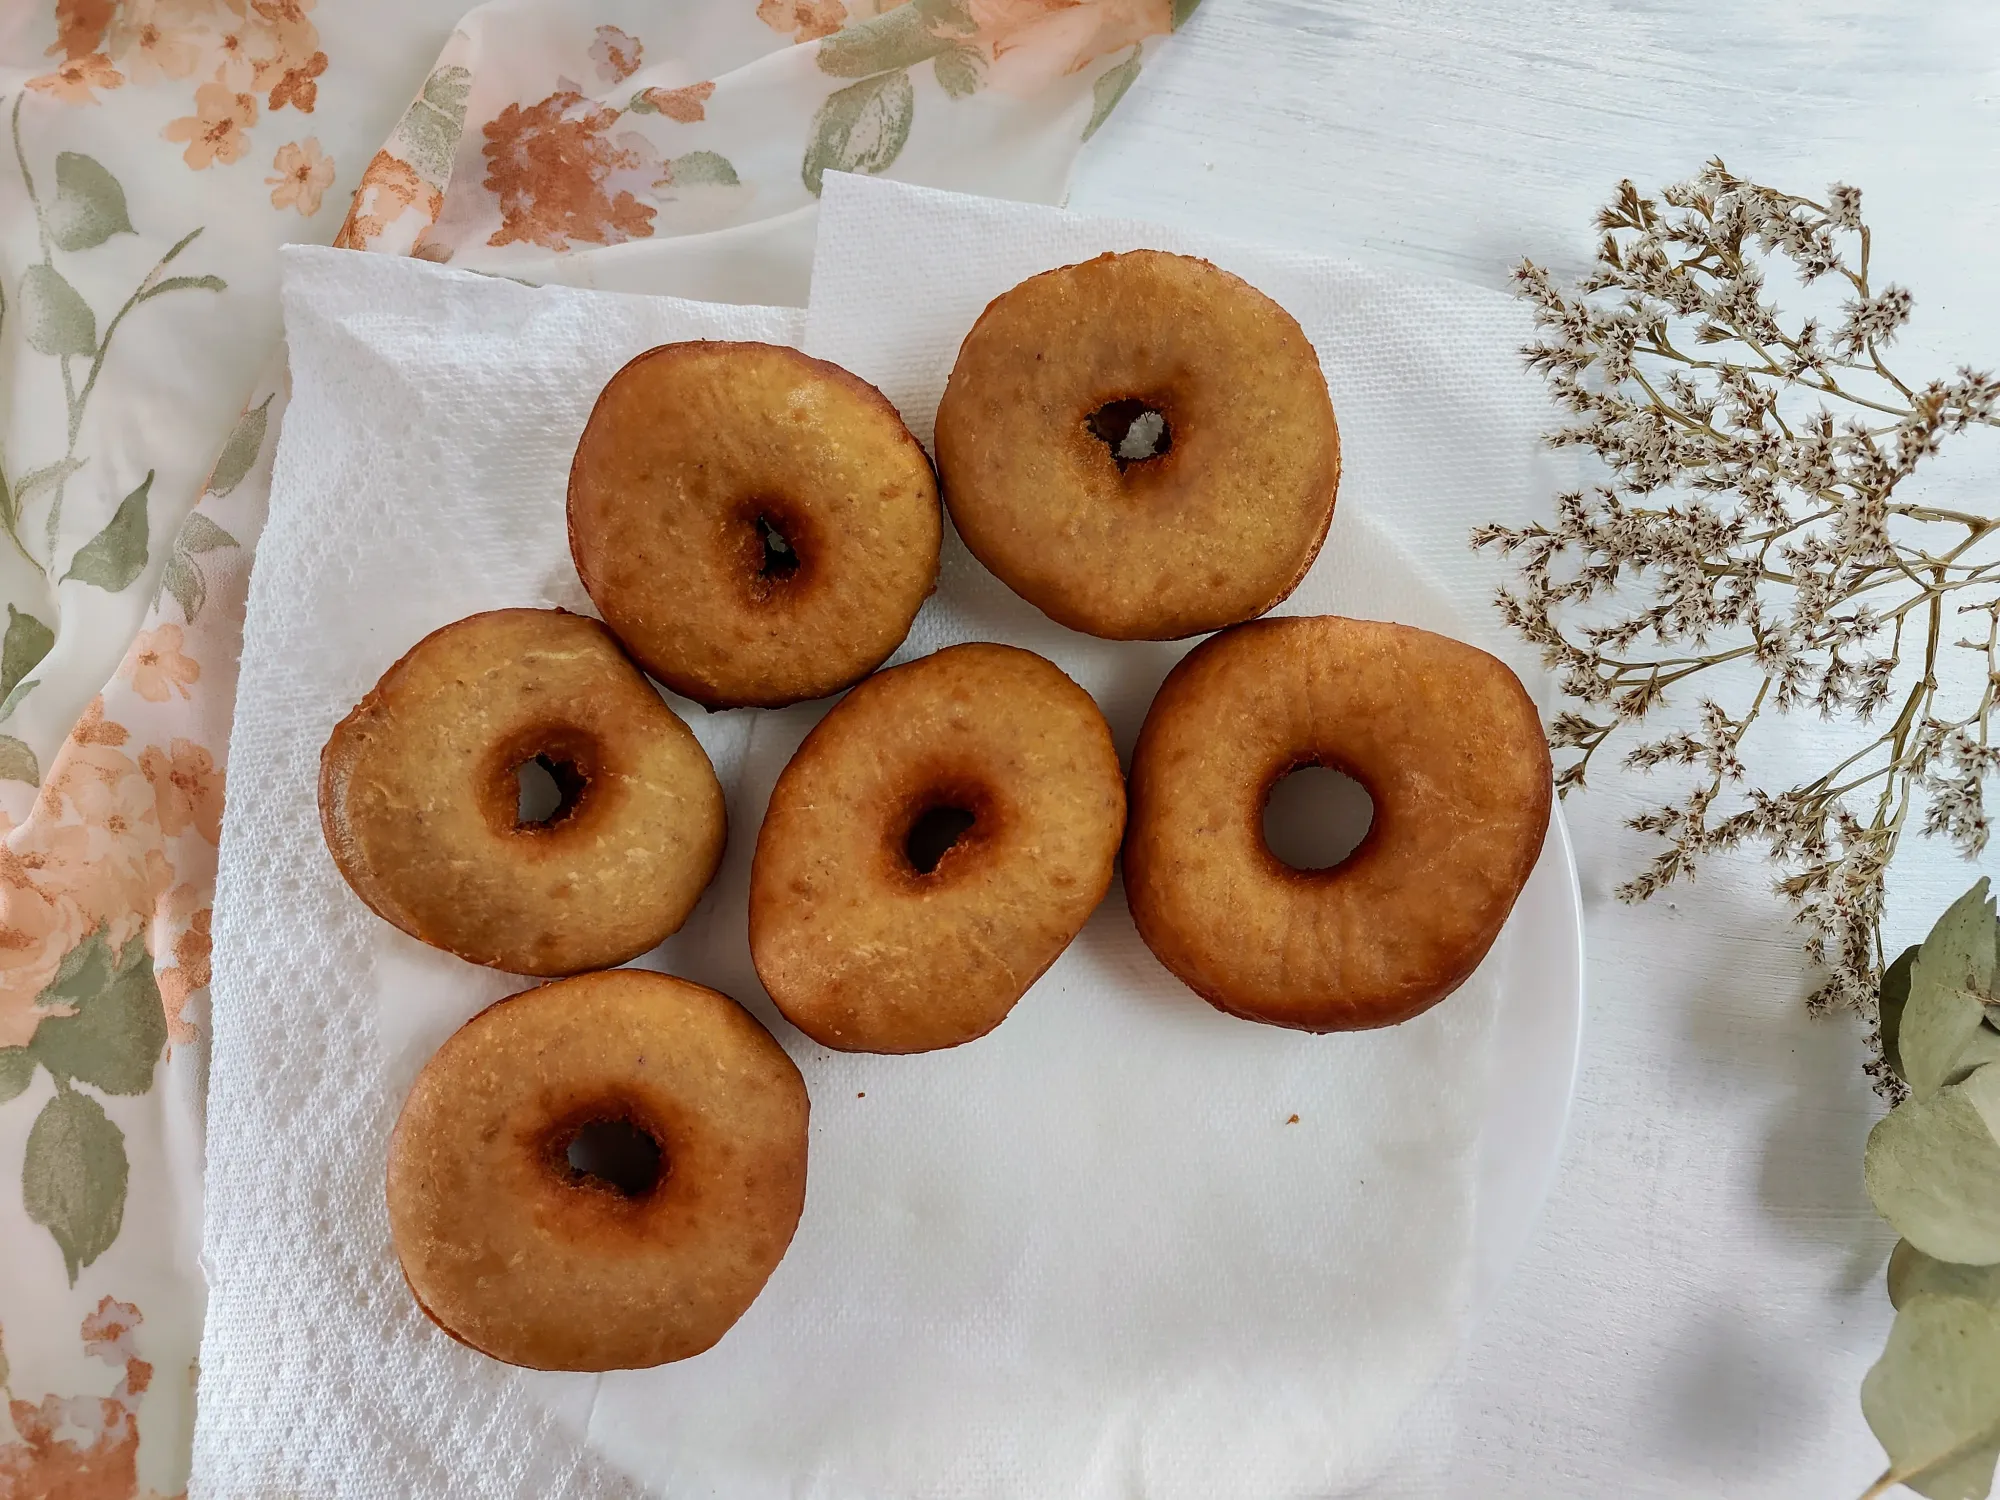 Unglazed donuts on a plate with paper towells